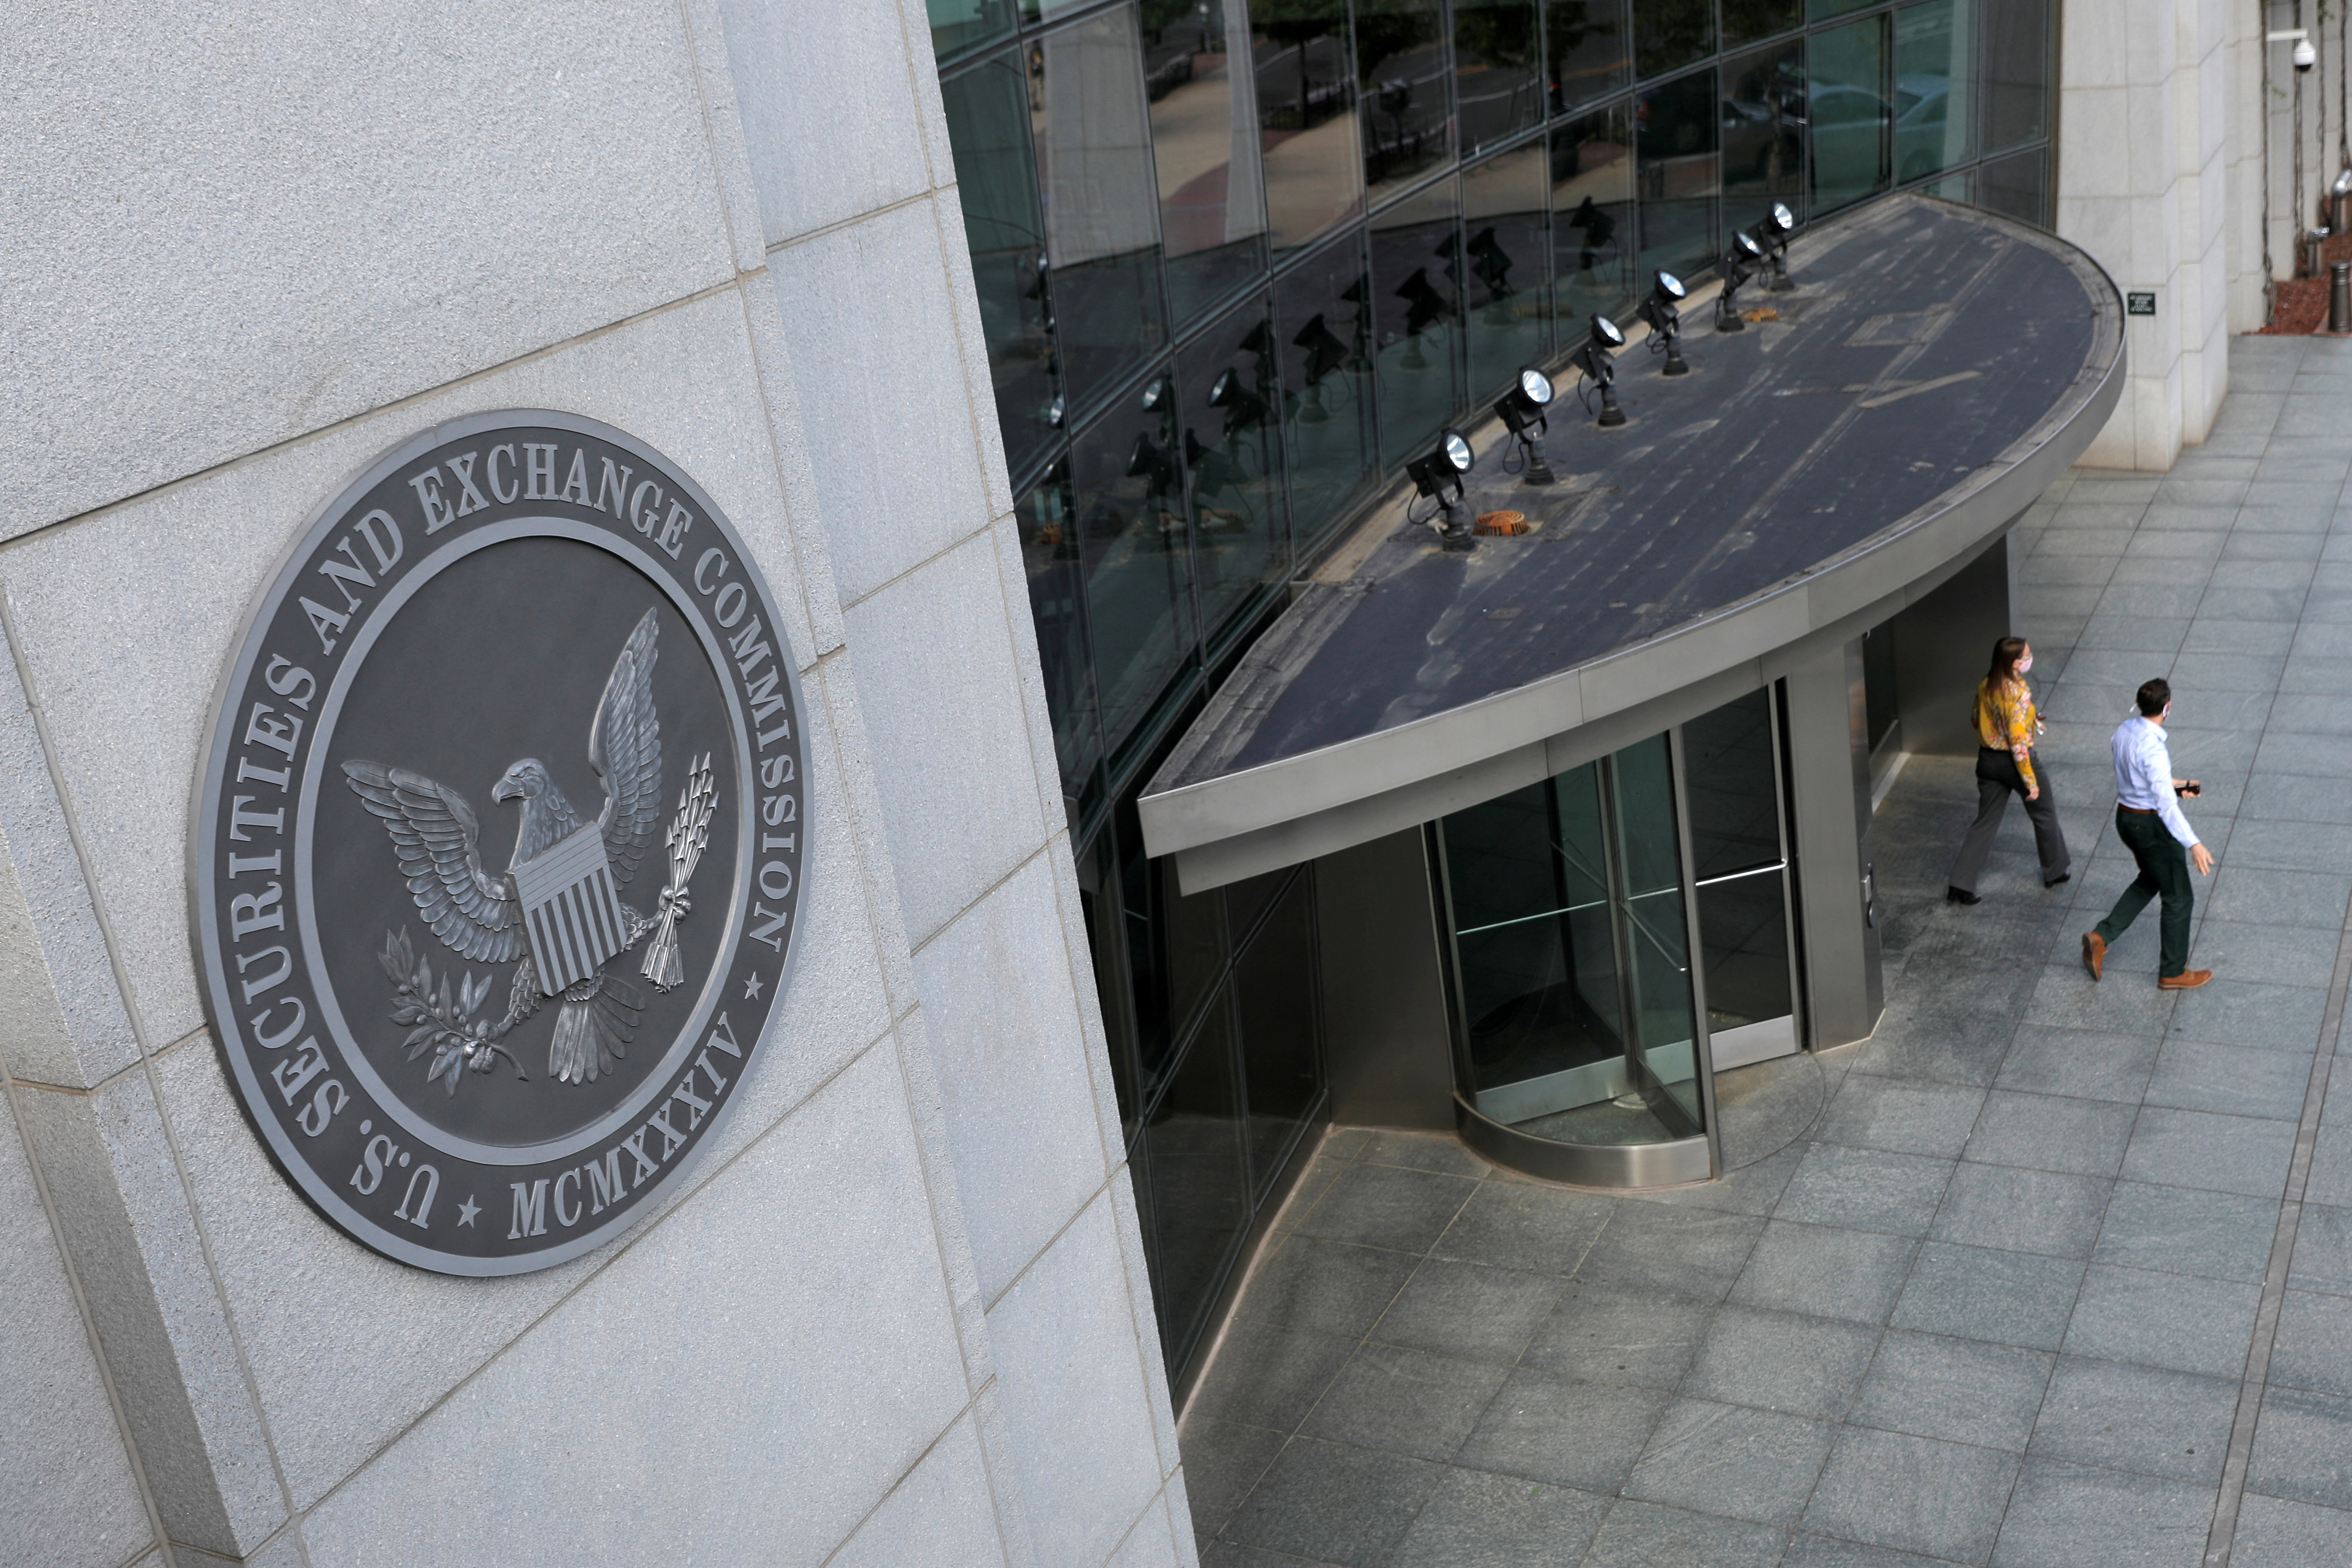 FILE PHOTO: People exit the headquarters of the U.S. Securities and Exchange Commission (SEC) in Washington, D.C.